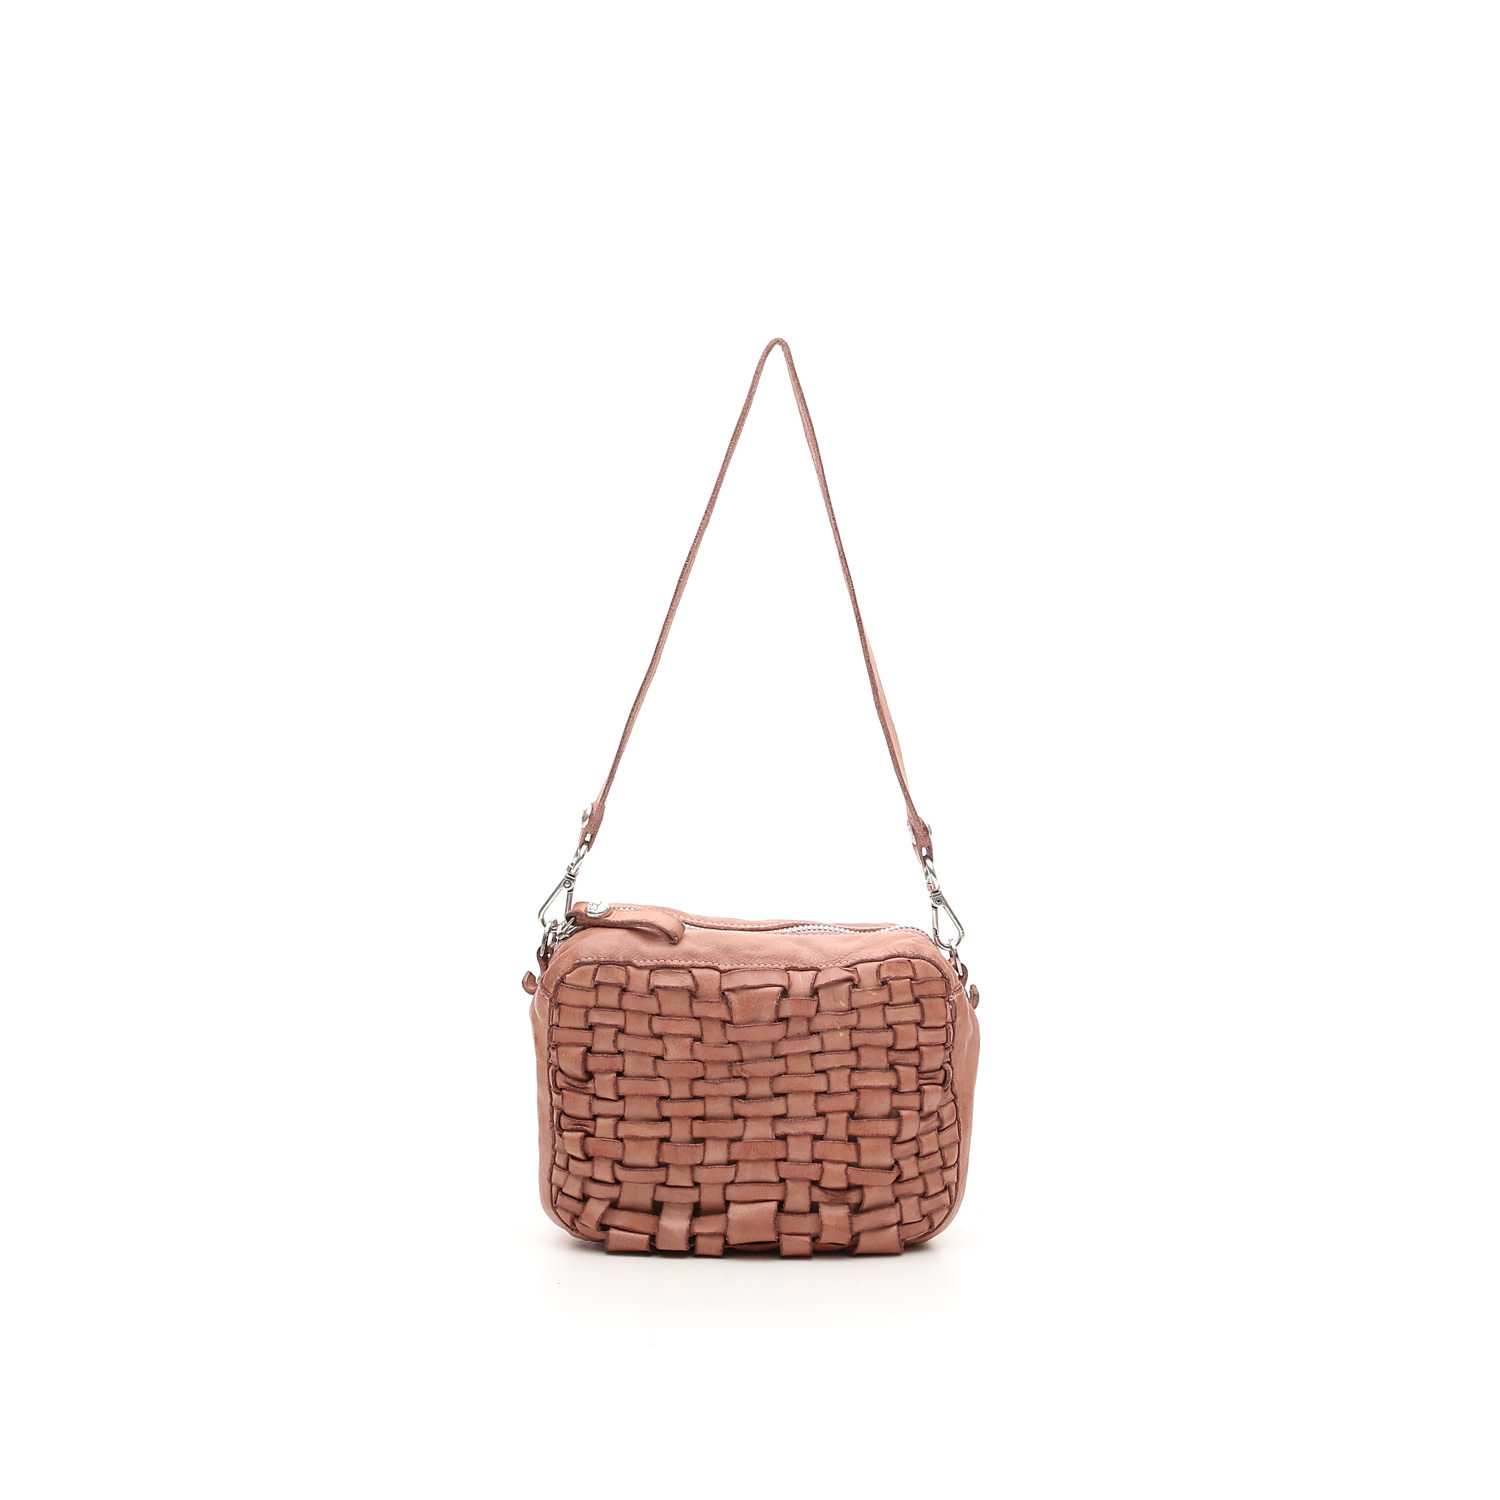 Campomaggi Bowling bag. Small. Genuine Leather. Bleached Woven. Pink.